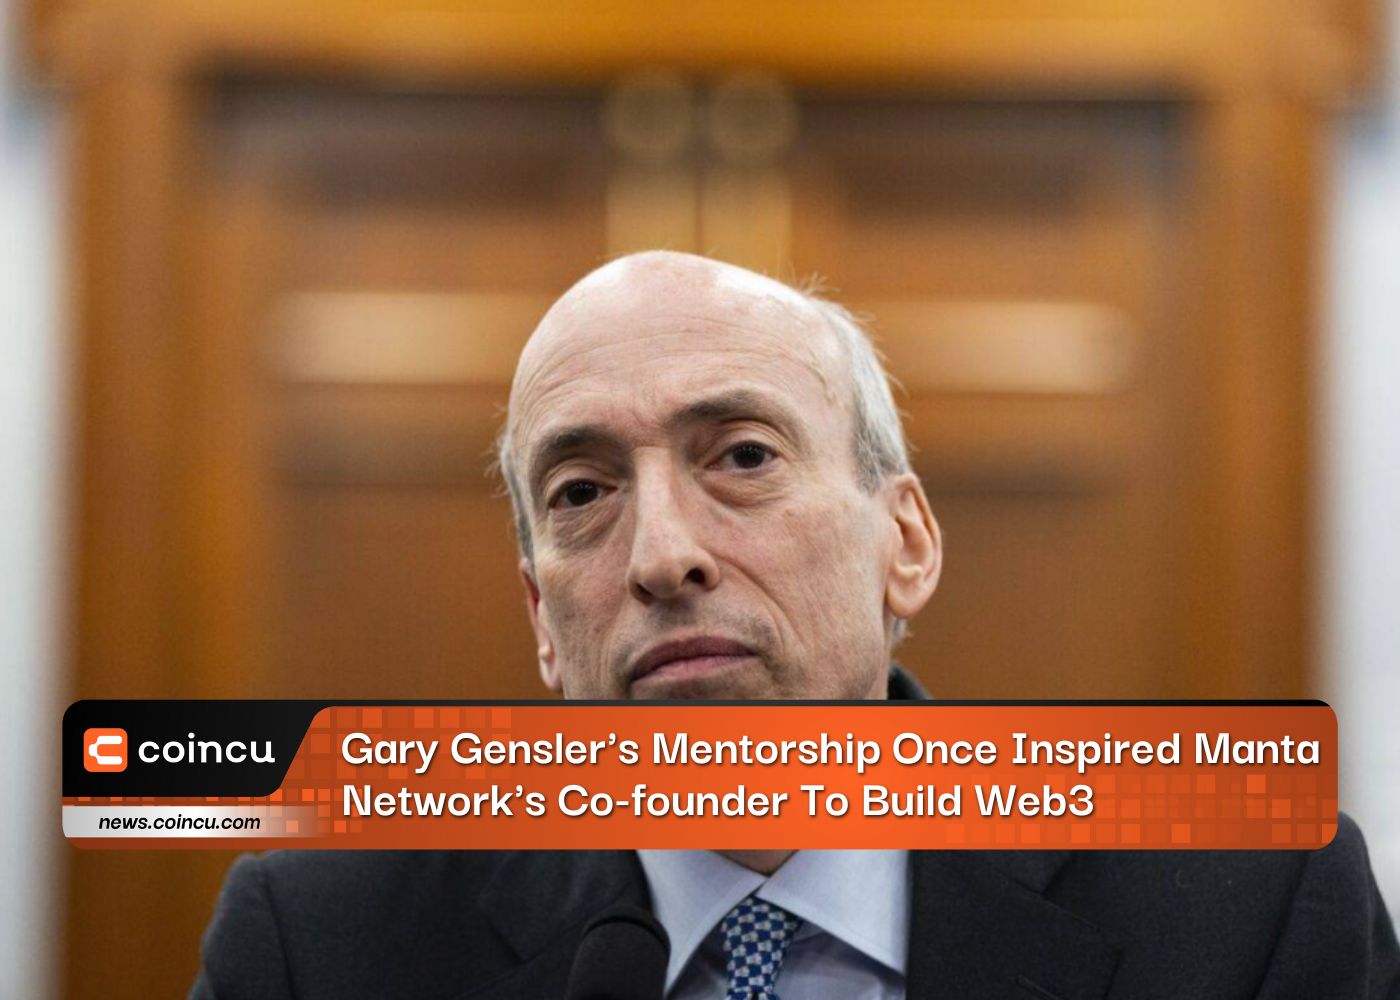 Gary Gensler's Mentorship Once Inspired Manta Network's Co-founder To Build Web3